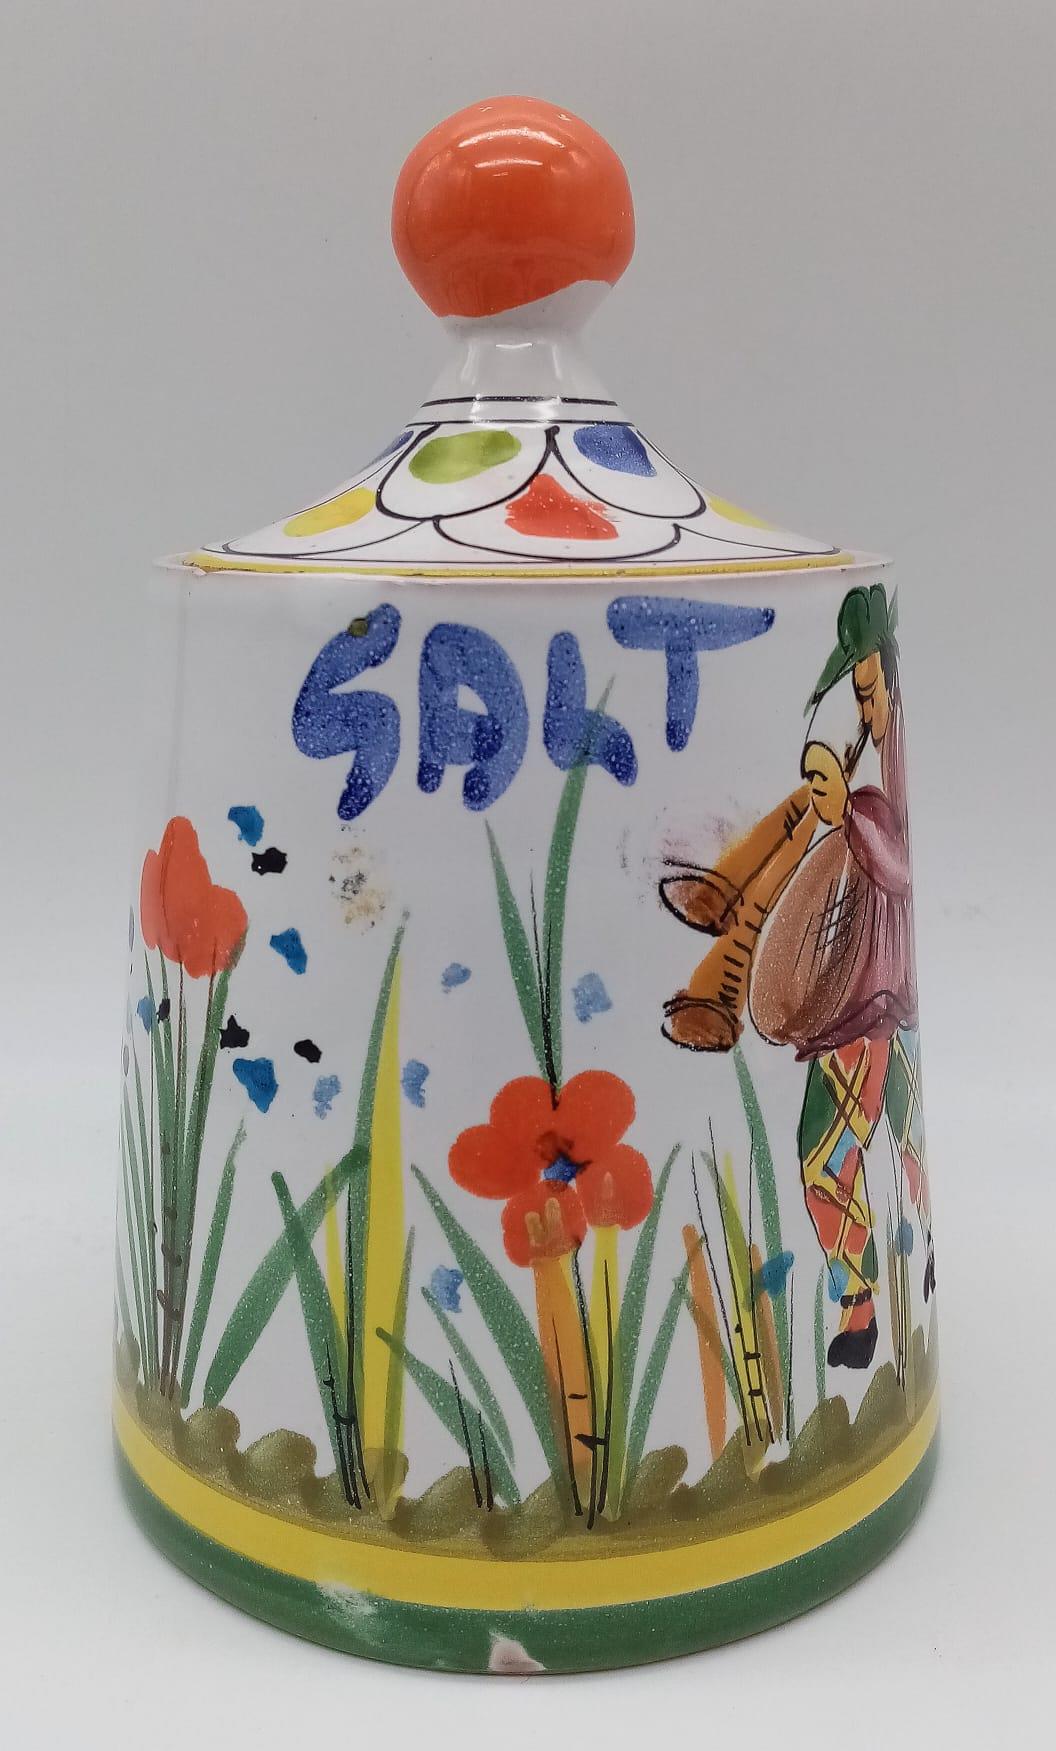 A Vintage, hand-painted, Salt Jar. Looks to be European, however there's no markings or